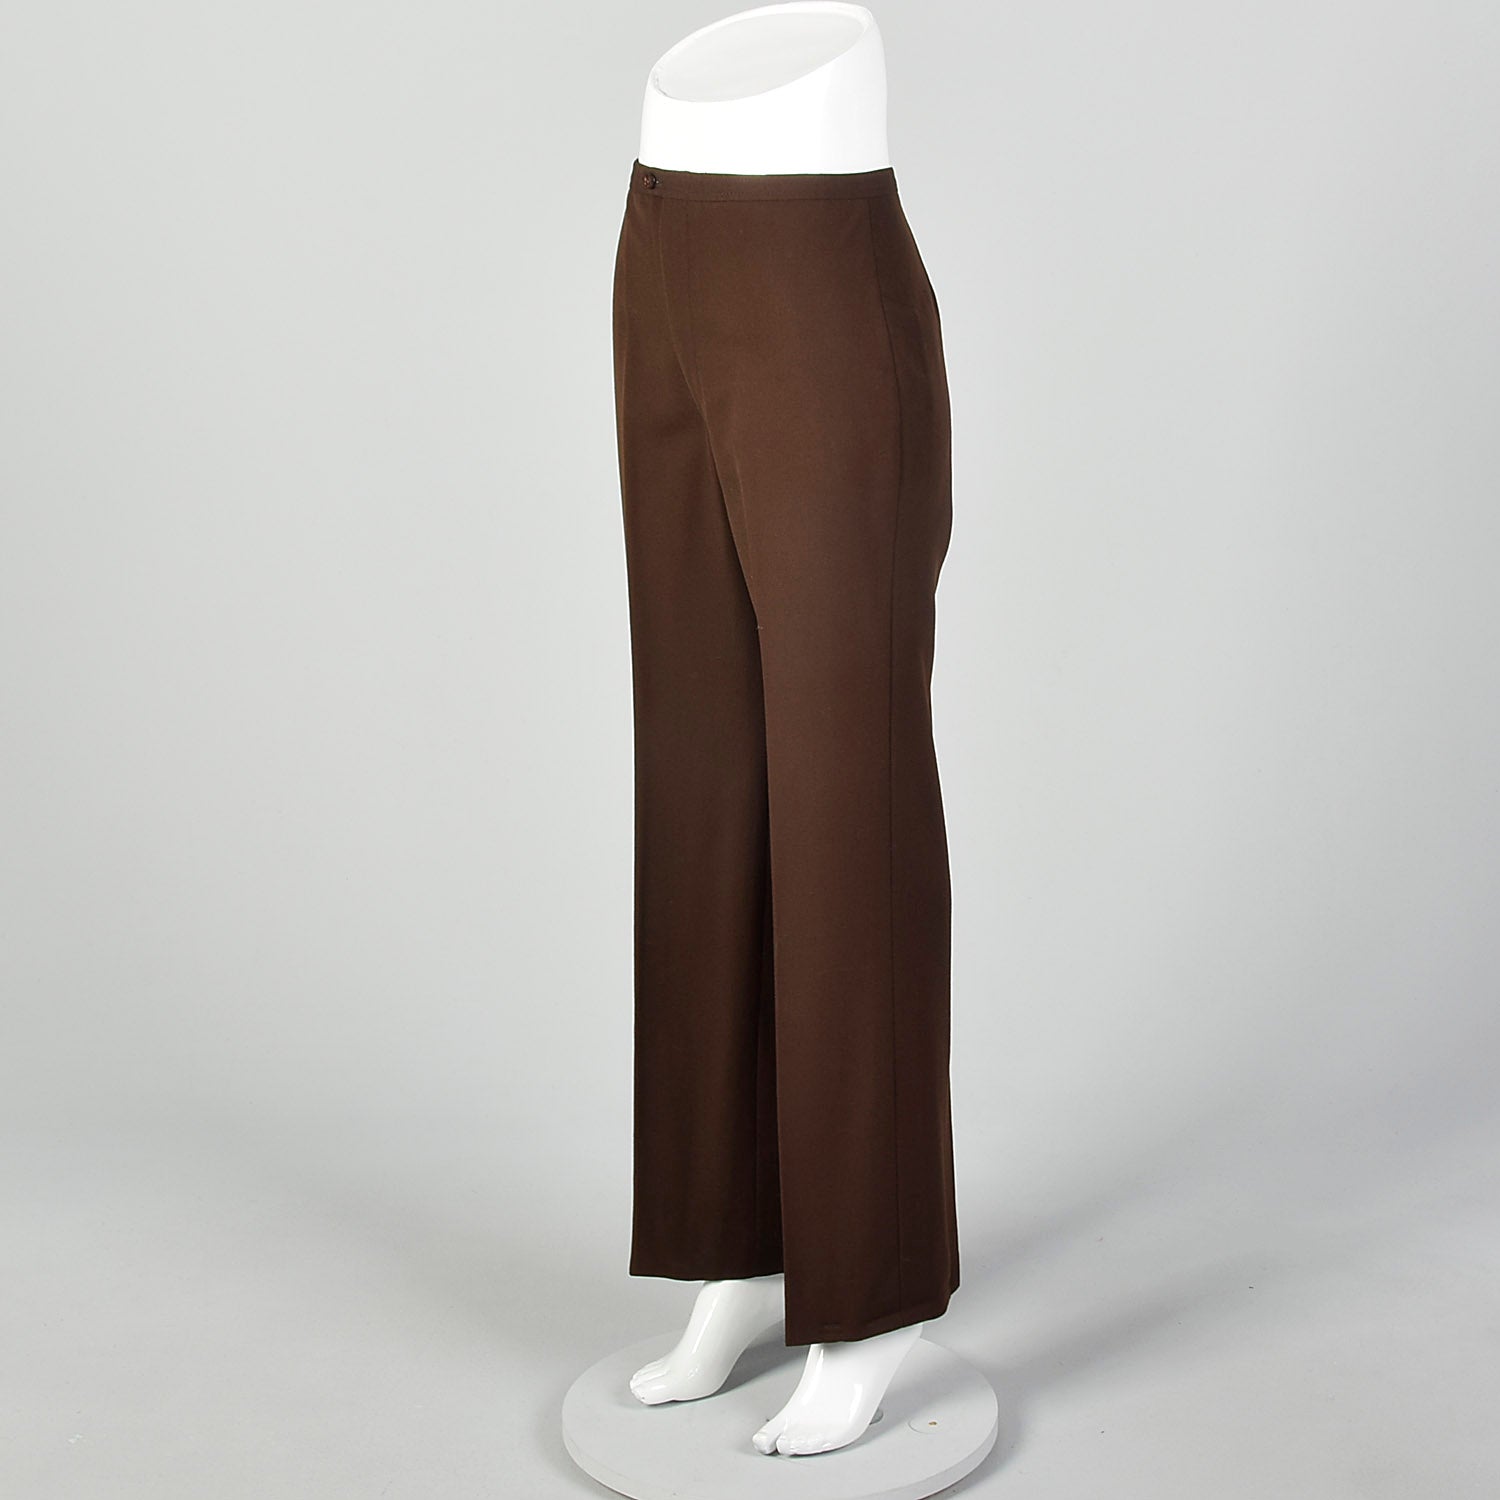 Small 1970s Brown Wide Leg Pants